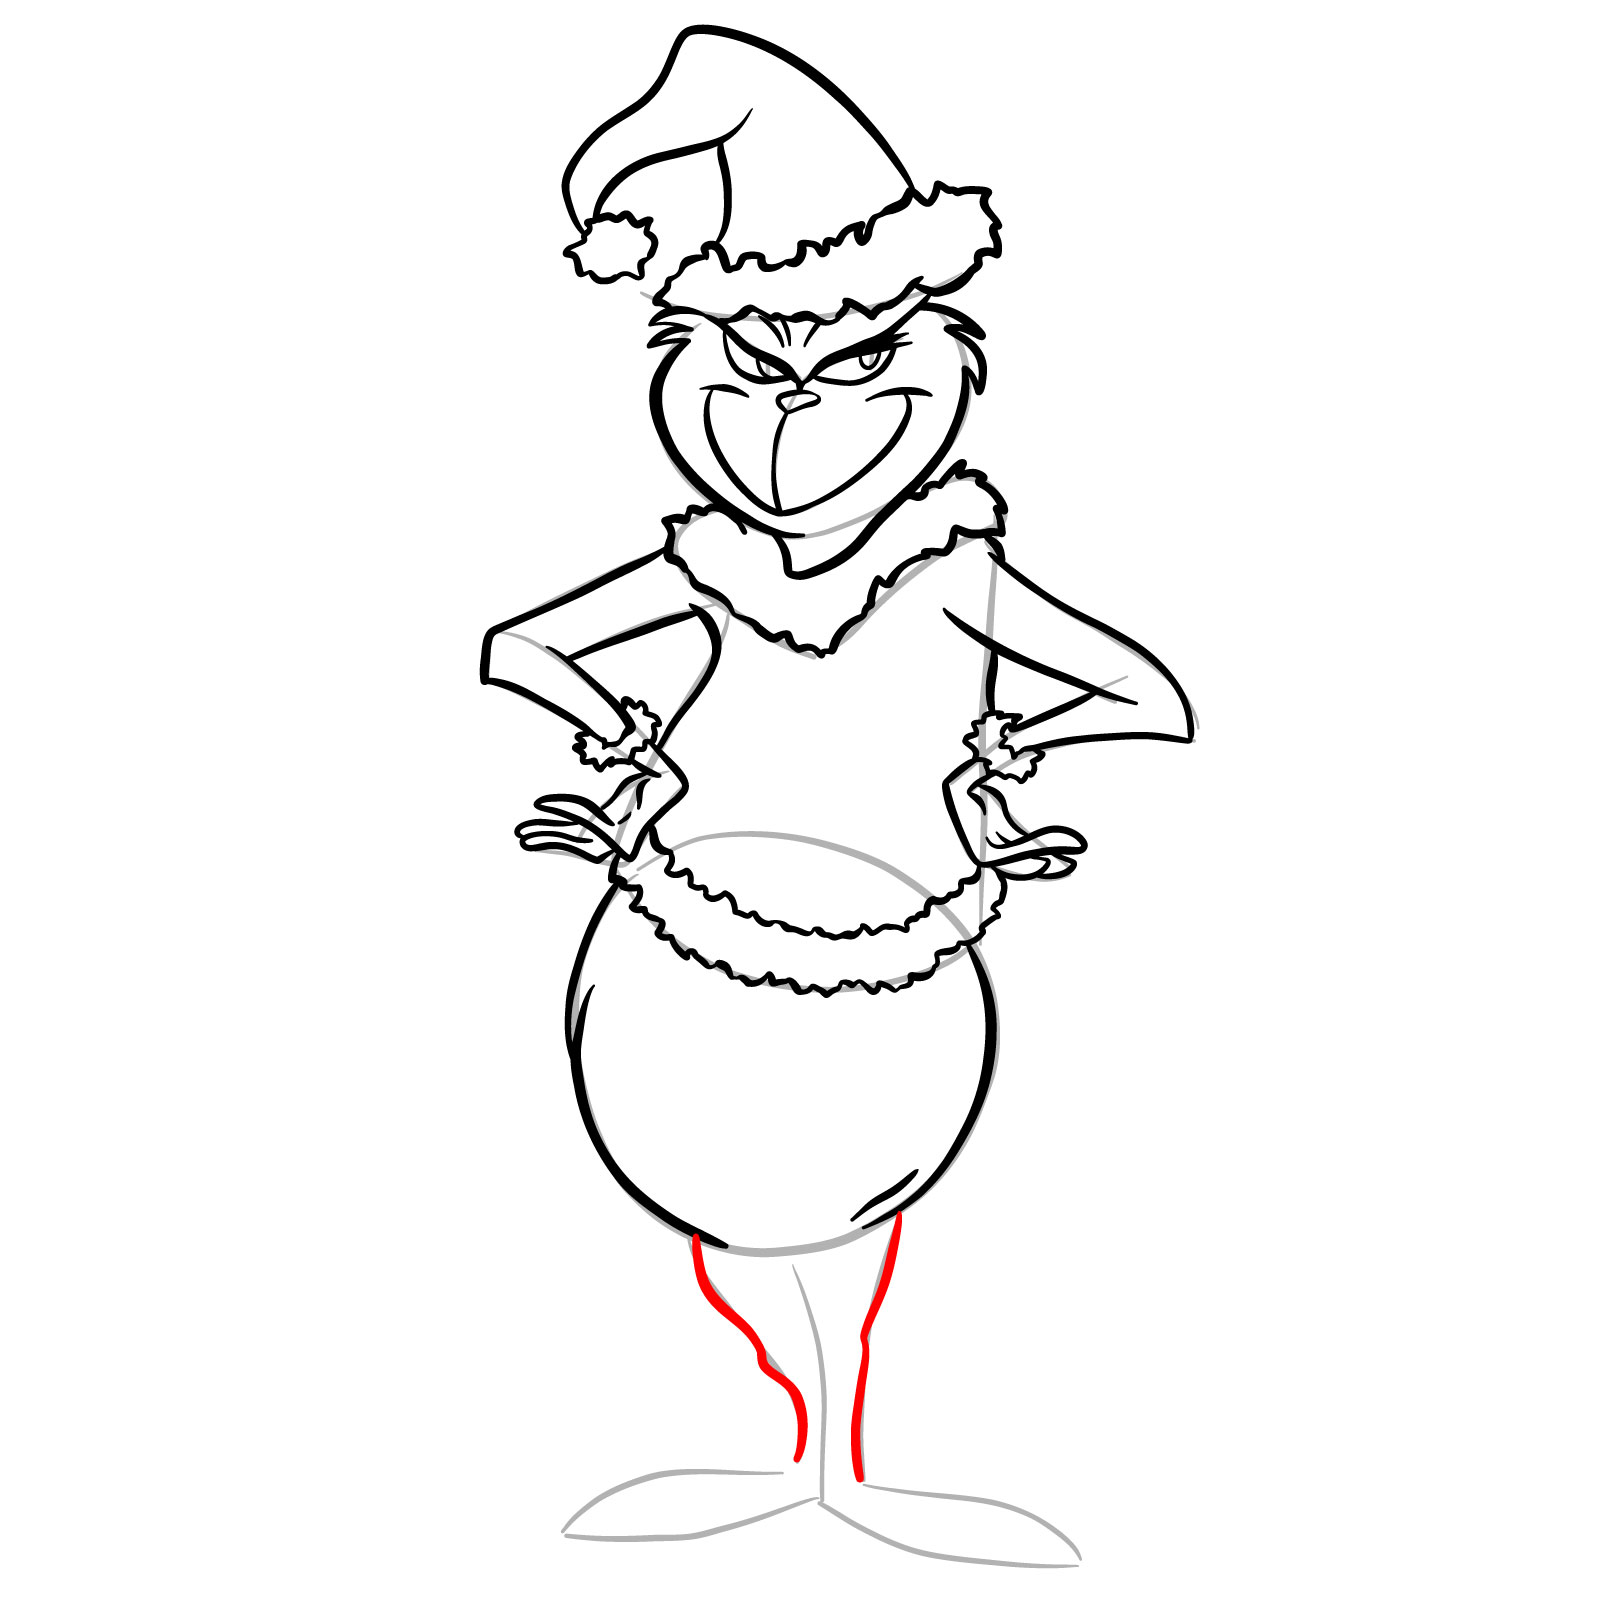 How to draw The Grinch in a Christmas costume - step 24